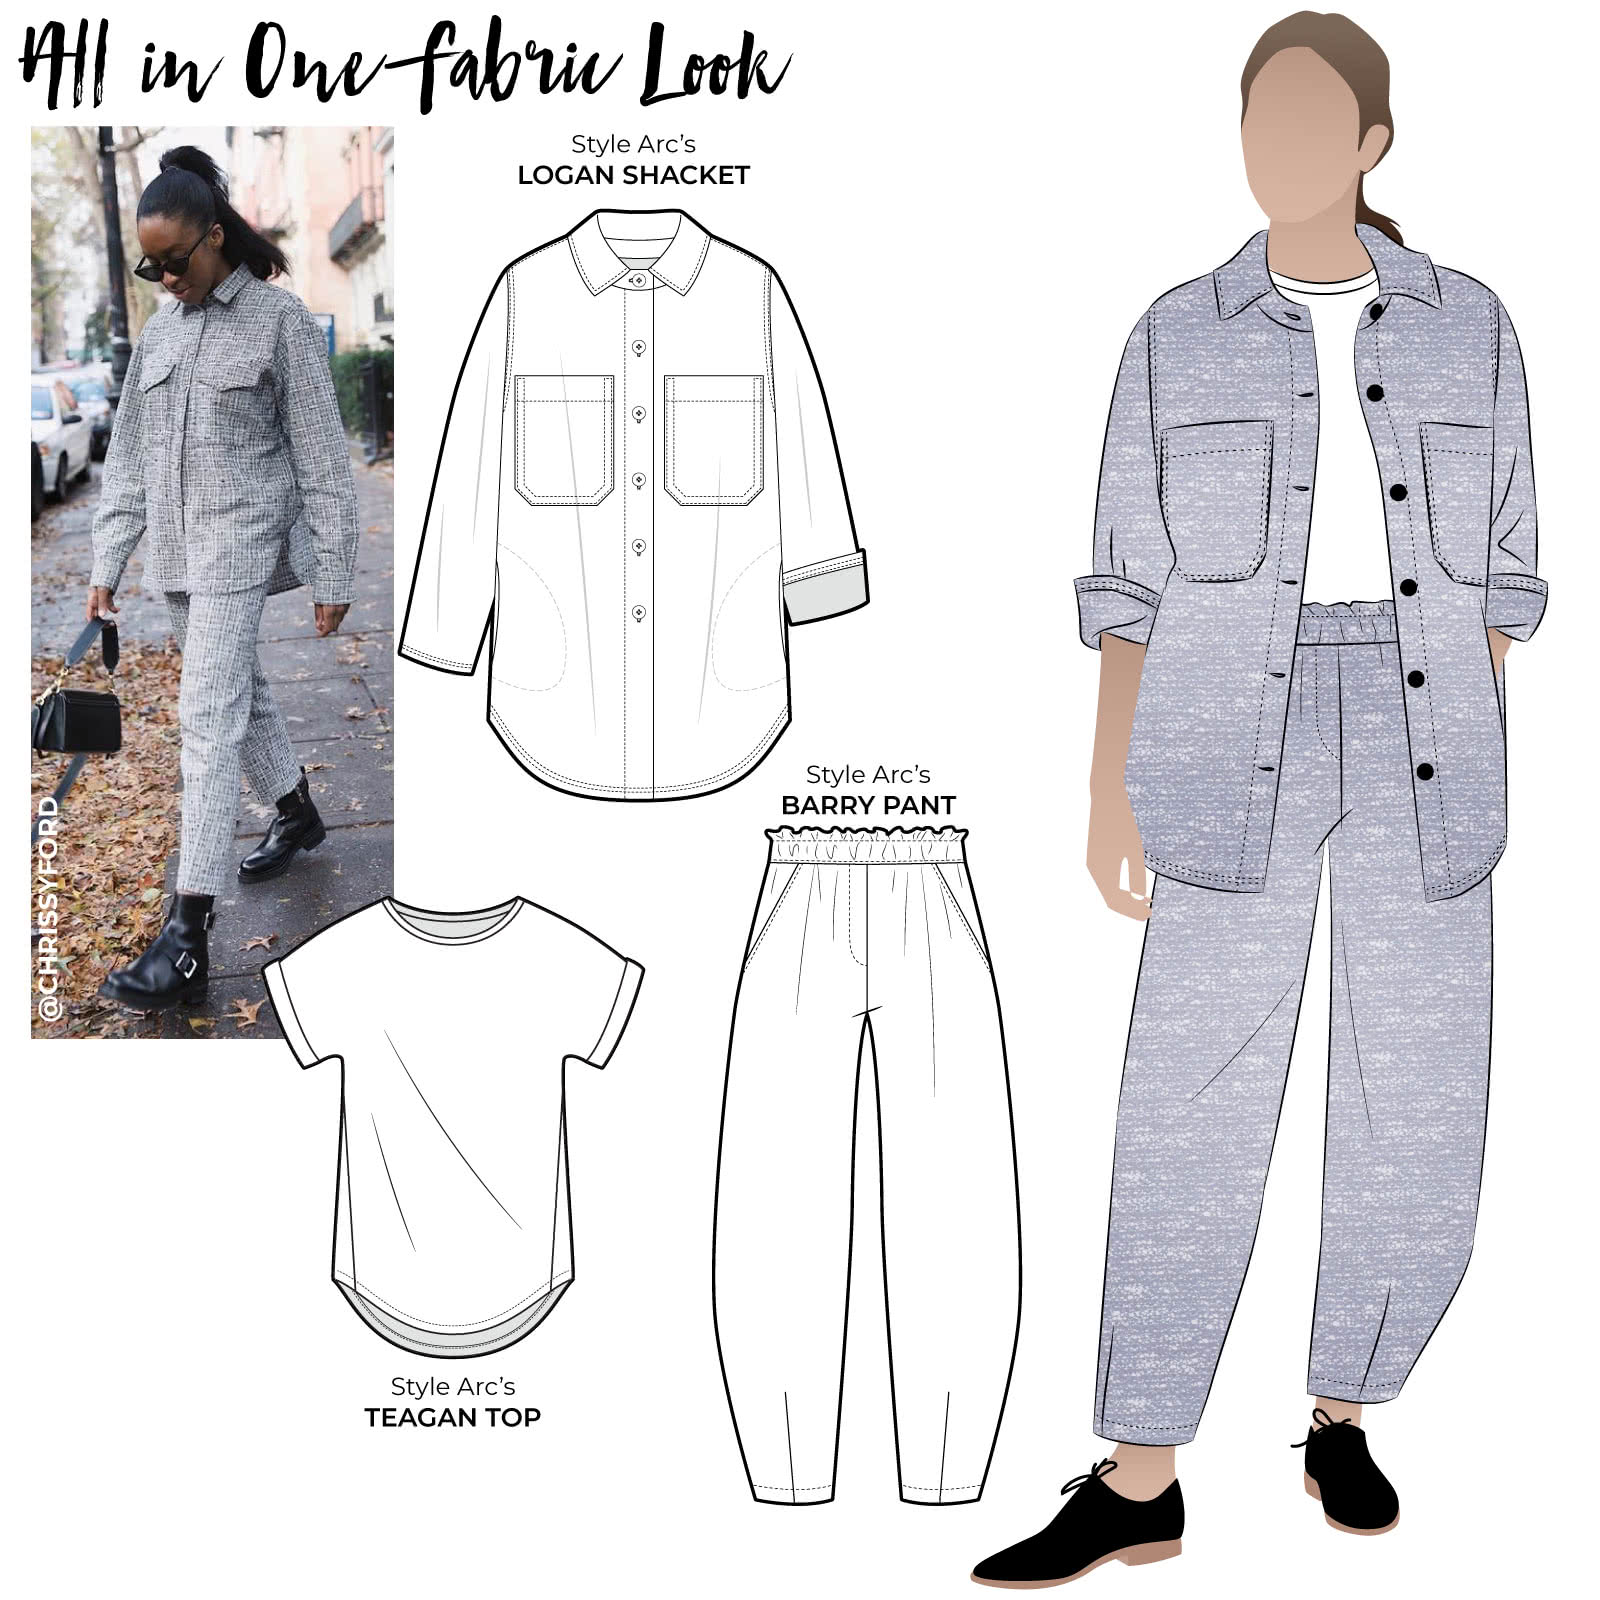 All in One Fabric Look Sewing Pattern Bundle By Style Arc - The perfect co-ord matching set of shacket, t-shirt and pants. Wear together as a fashionable look or separately in many ways.